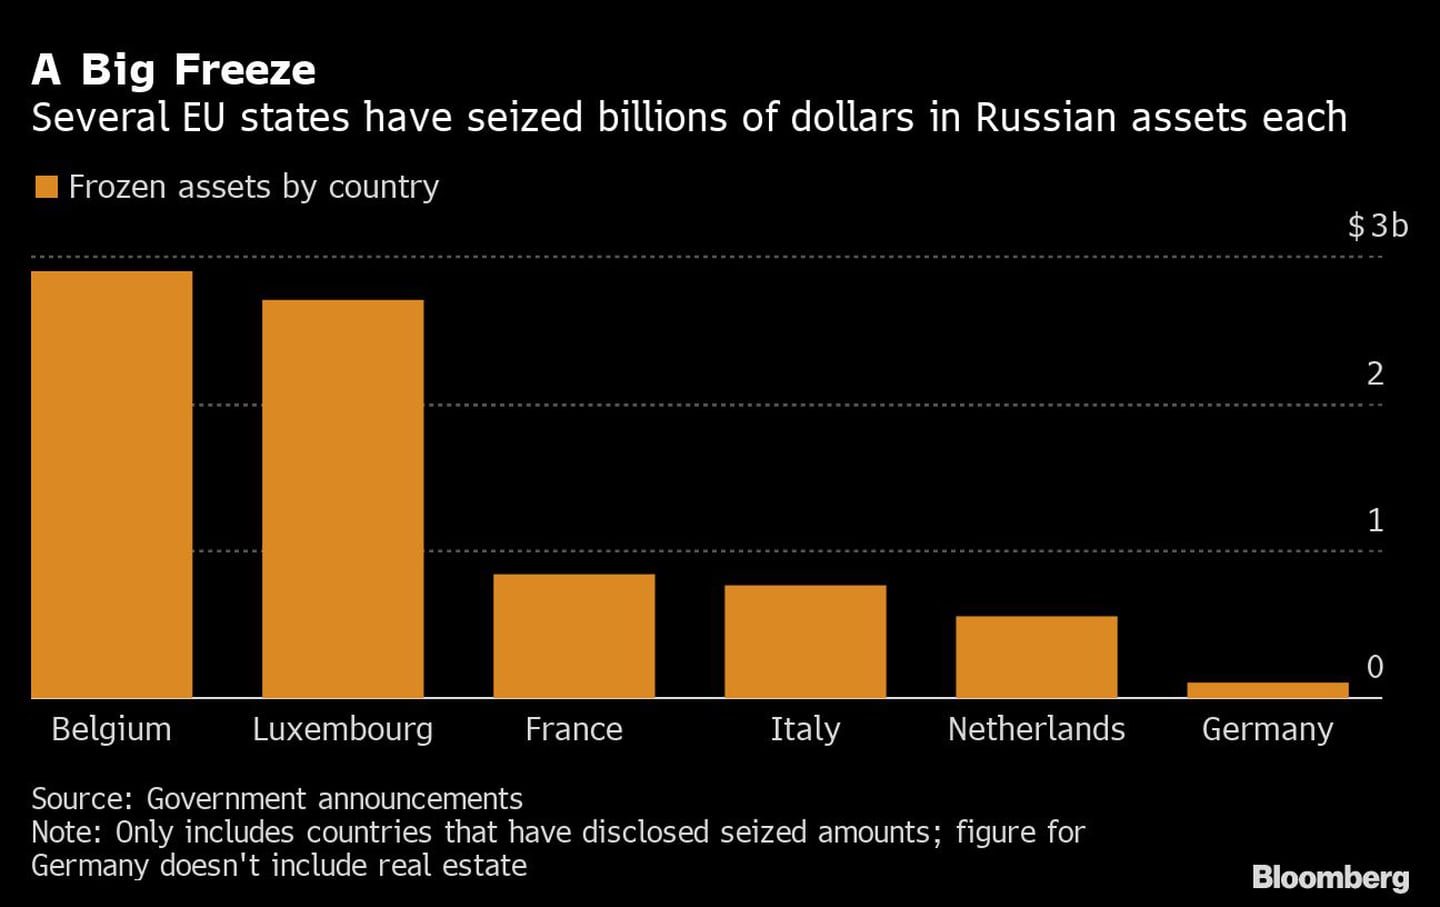 A Big Freeze | Several EU states have seized billions of dollars in Russian assets eachdfd